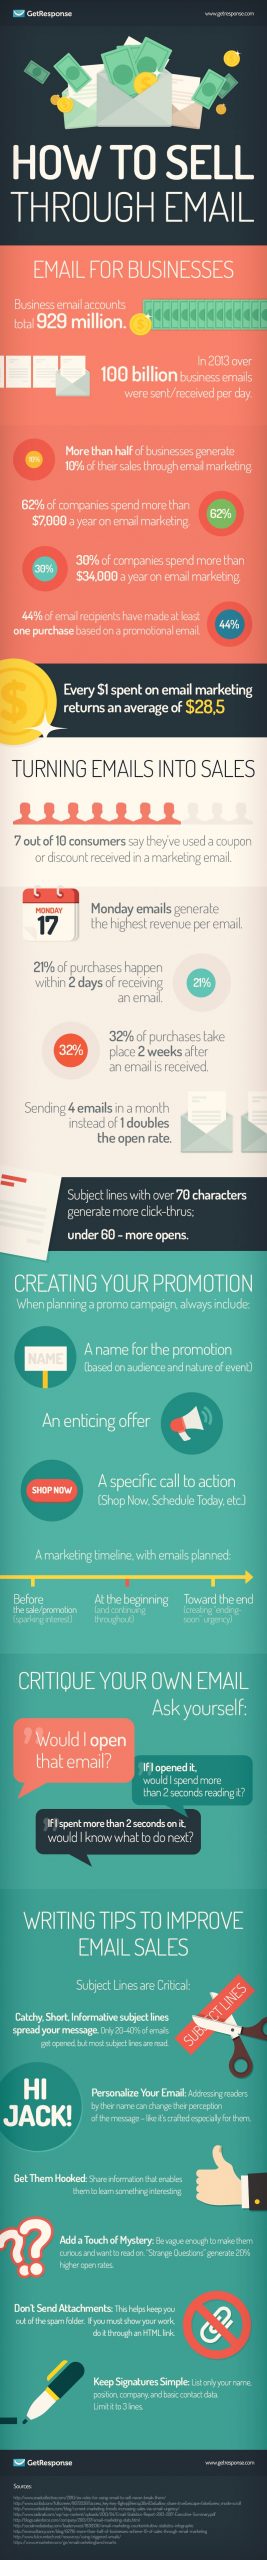 How to Sell Through Email (Infographic)